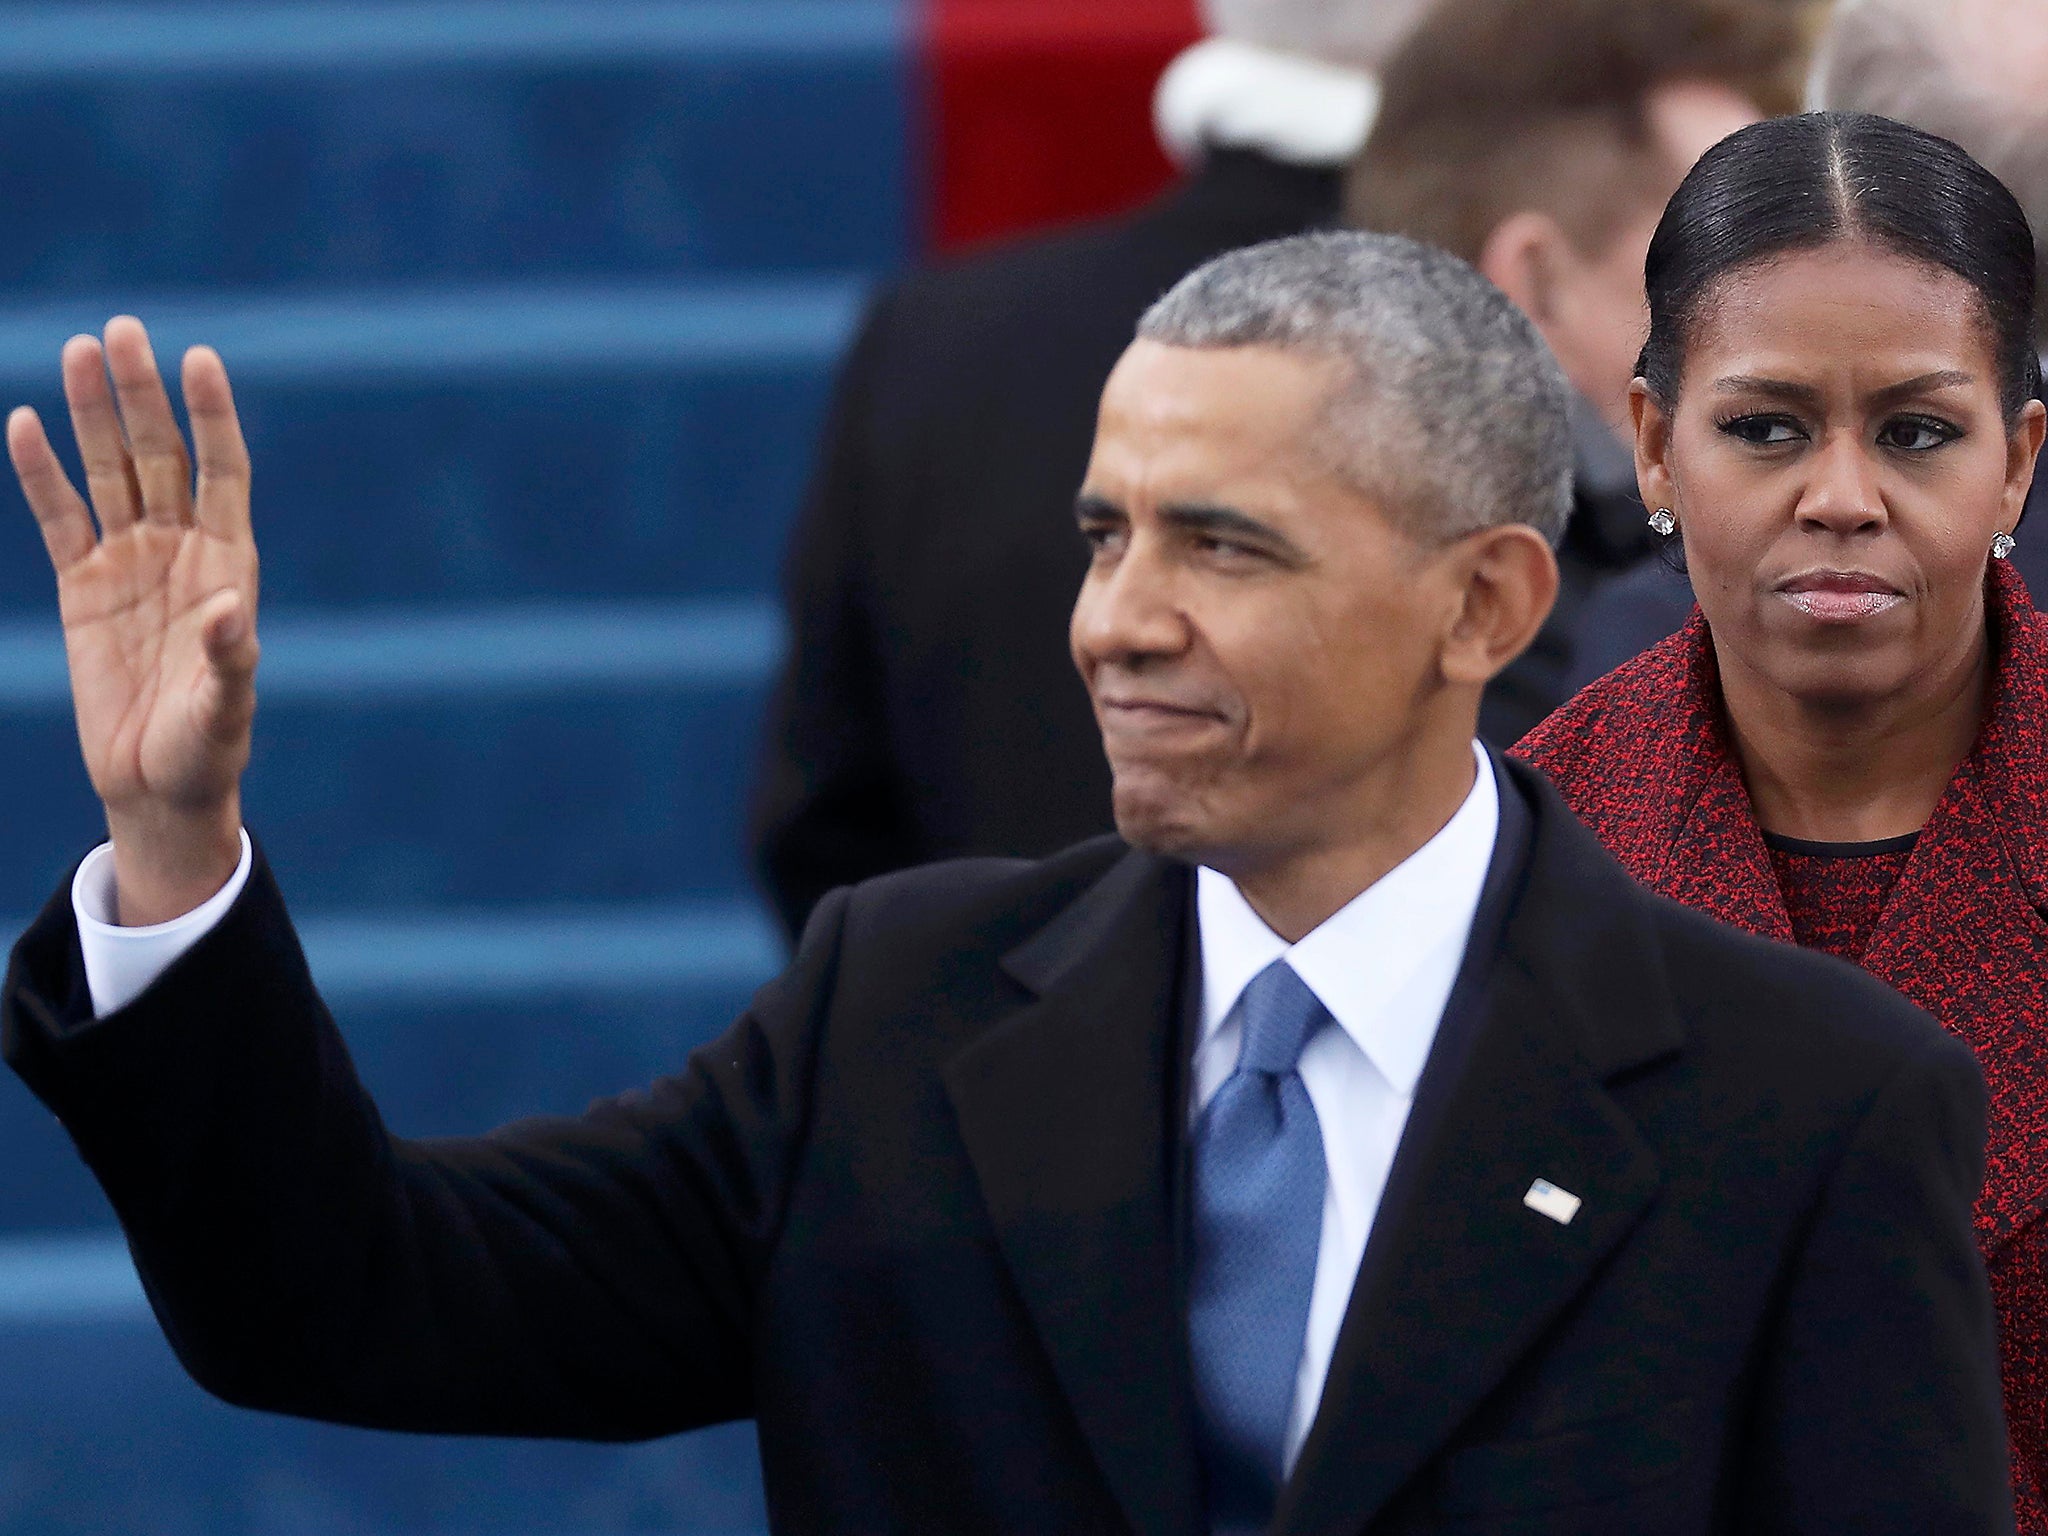 President Barack Obama and First Lady Michelle Obama look on at inauguration ceremonies swearing in Donald Trump as the 45th president of the United States on the West front of the U.S. Capitol in Washington